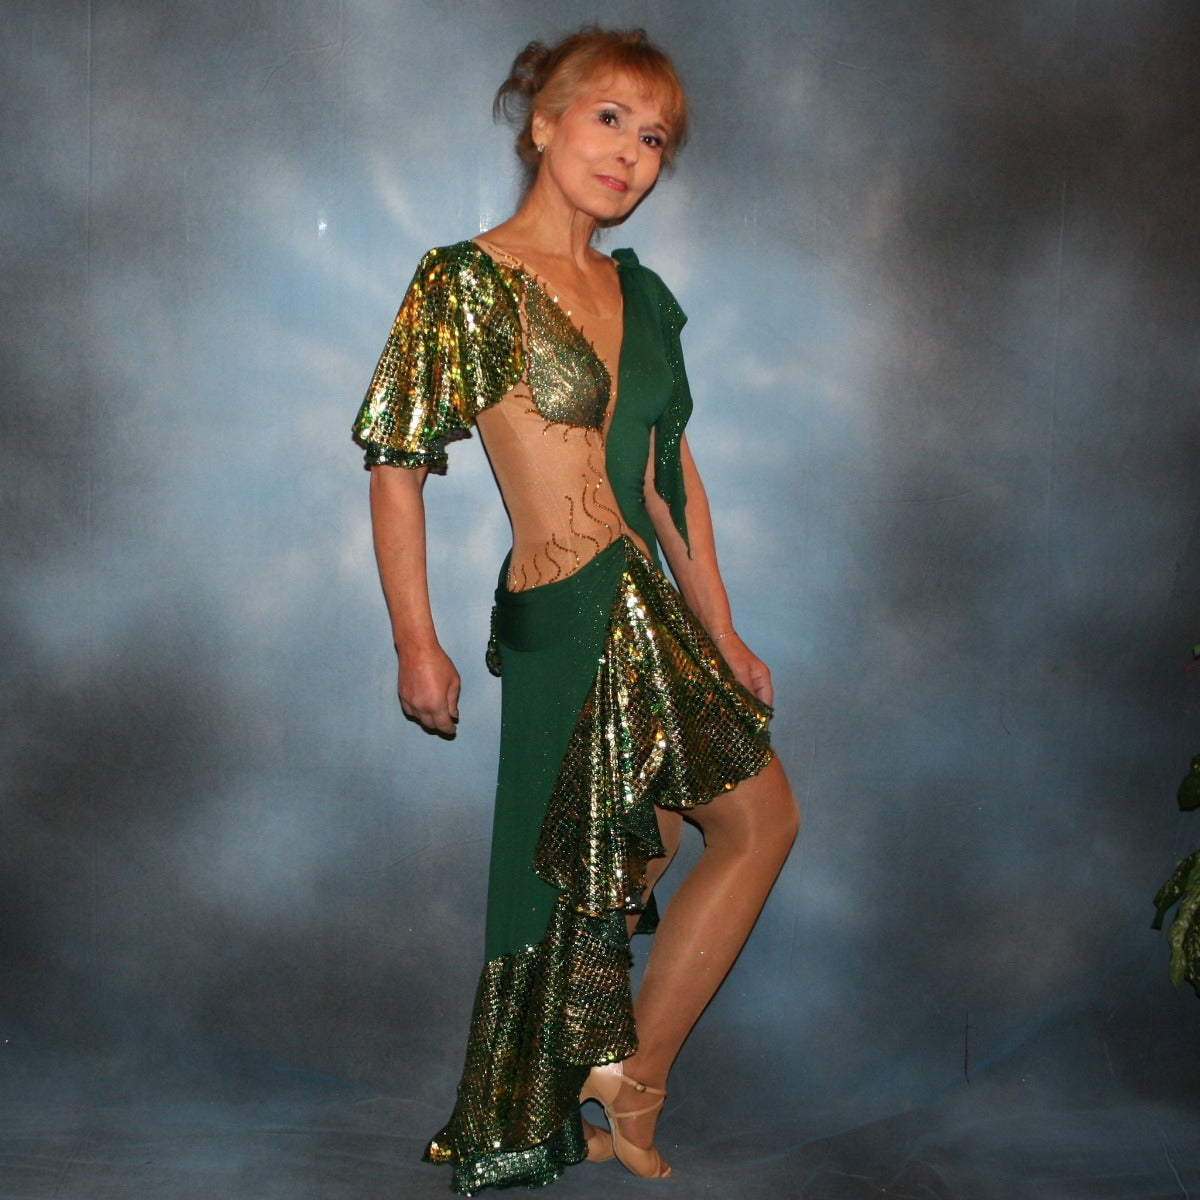 Crystal's Creations side view of Green Latin/rhythm dress was created on a nude illusion base of deep emerald green glitter slinky fabric along with flounces & accents of rich emerald green & gold tropical print sequin fabric, embellished with gold aurum Swarovski stonework plus hand beaded detailing.